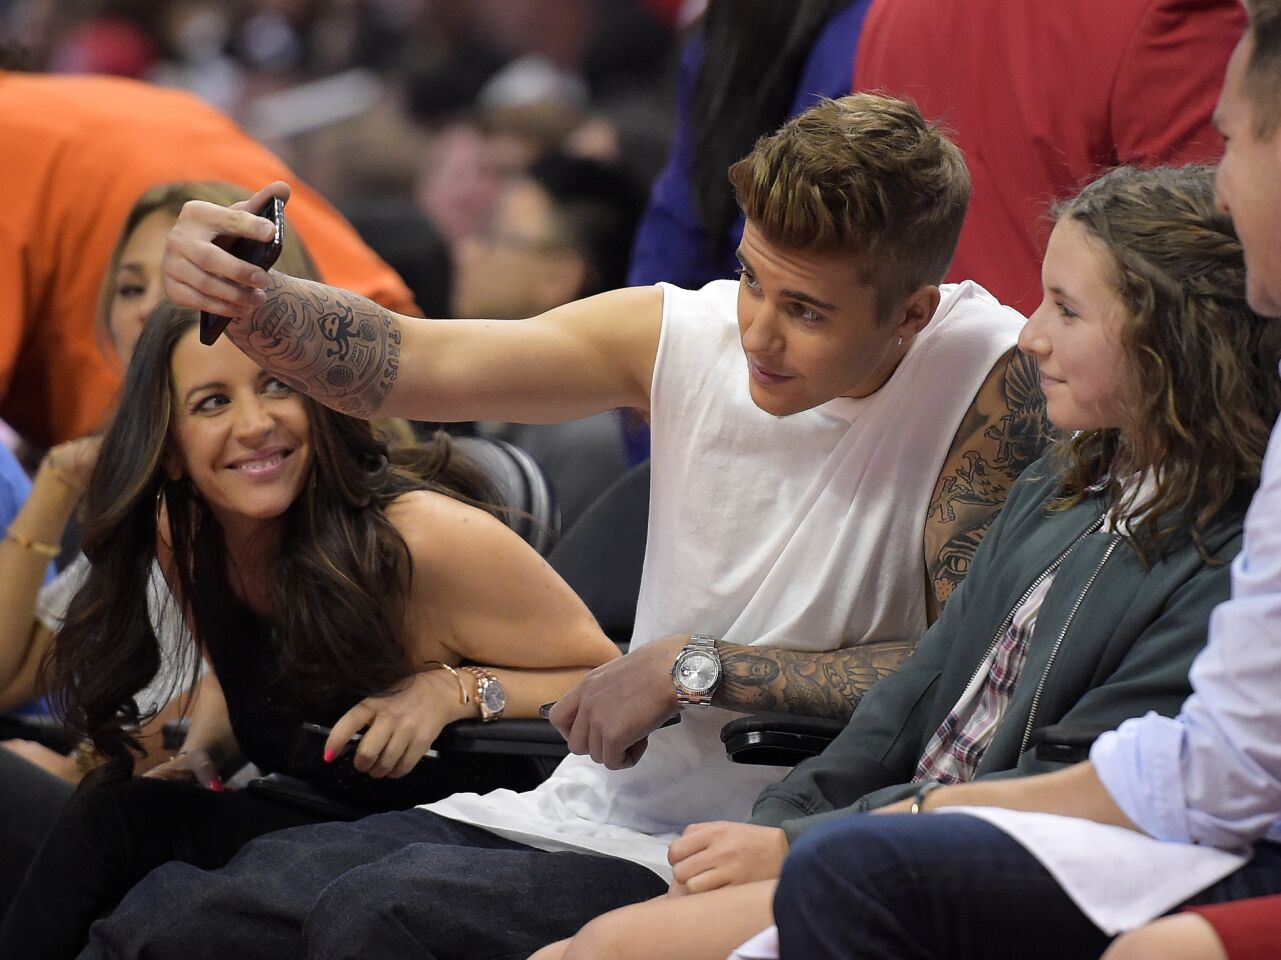 Singer Justin Bieber, center, takes a selfie with a young fan as he watches the Los Angeles Clippers play the Oklahoma City Thunder with his mother, Pattie Mallette, in the second half of Game 4 of the Western Conference semifinals on May 11, 2014, in Los Angeles.